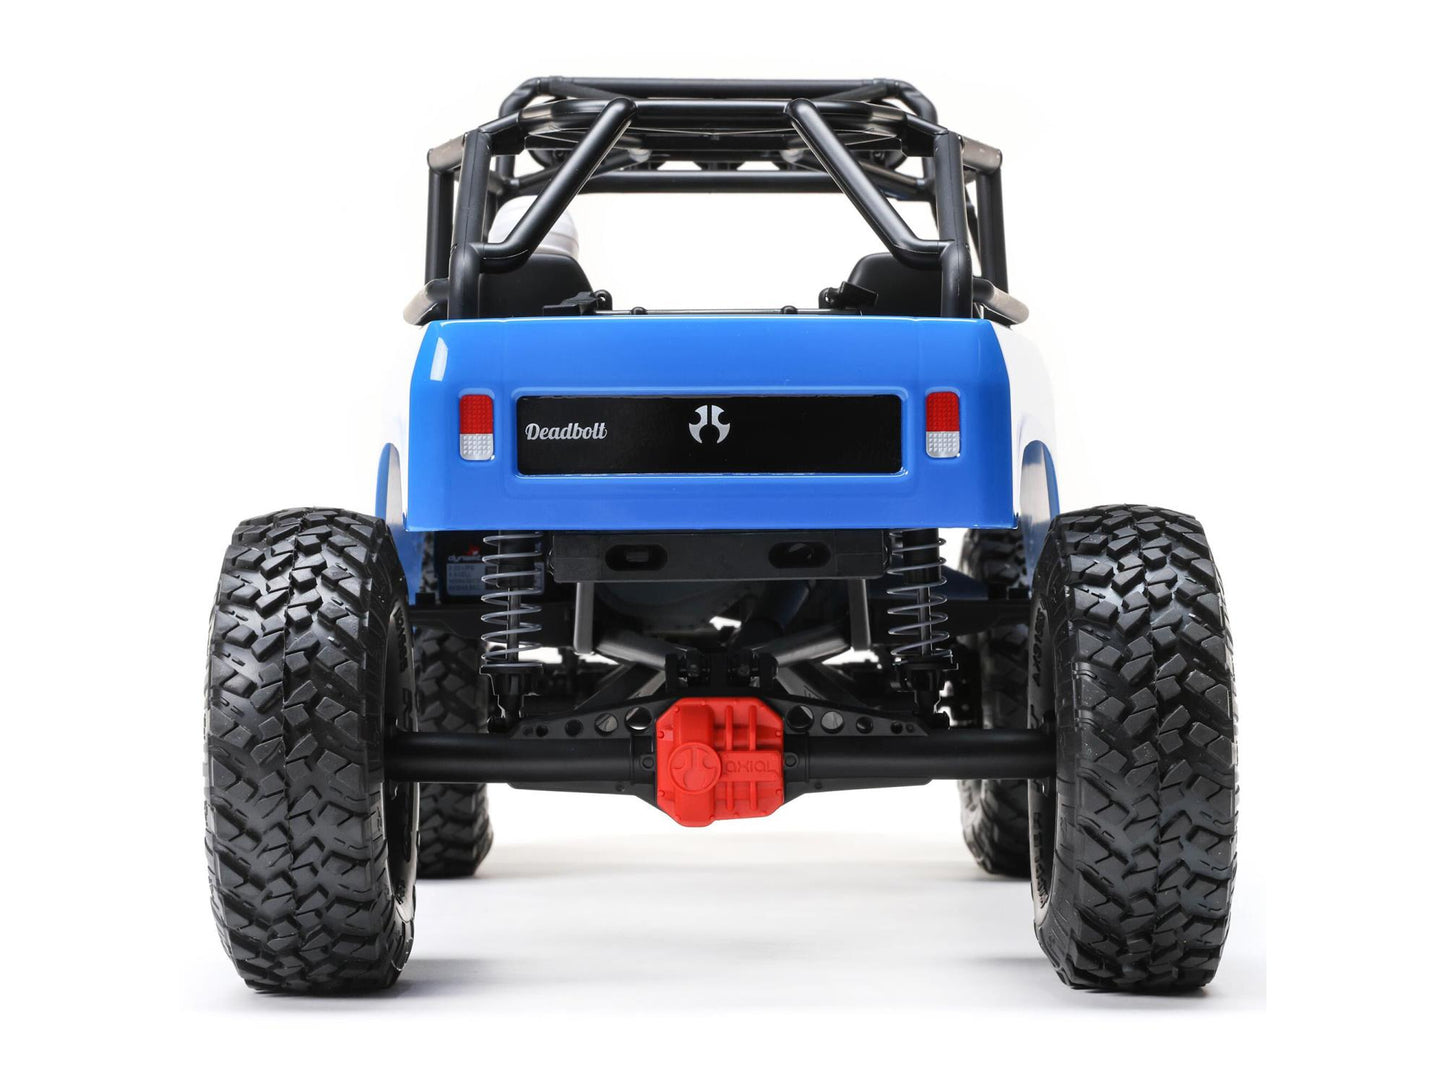 AXIAL 1/10 SCX10 II Deadbolt 4WD Brushed RTR, Blue  AXI03025T1  (shadow stock)